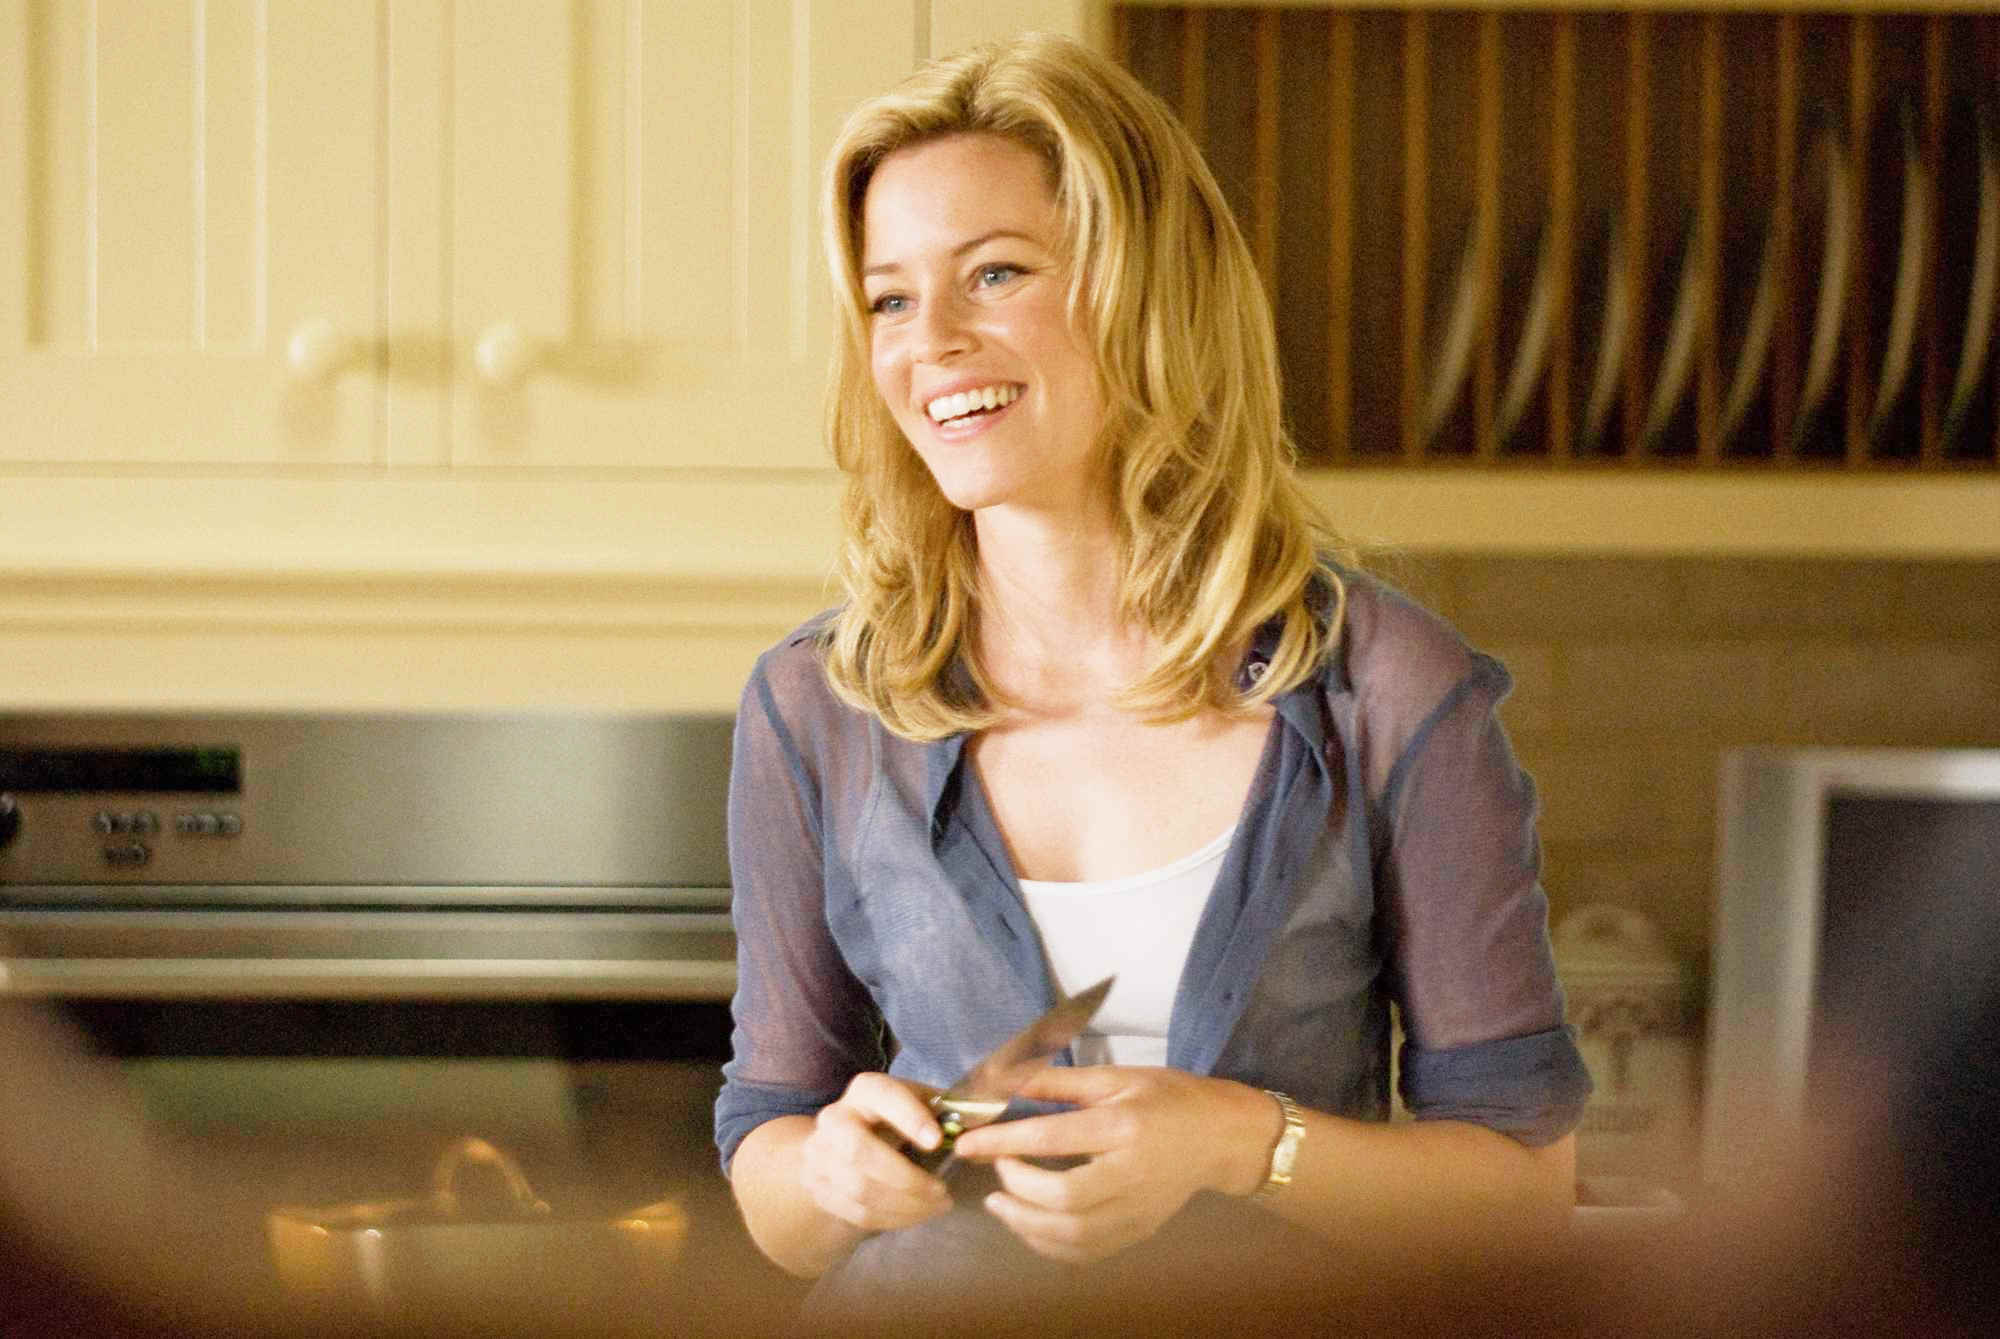 Elizabeth Banks stars as Rachael in DreamWorks' The Uninvited (2009). Photo credit by Kimberley French.